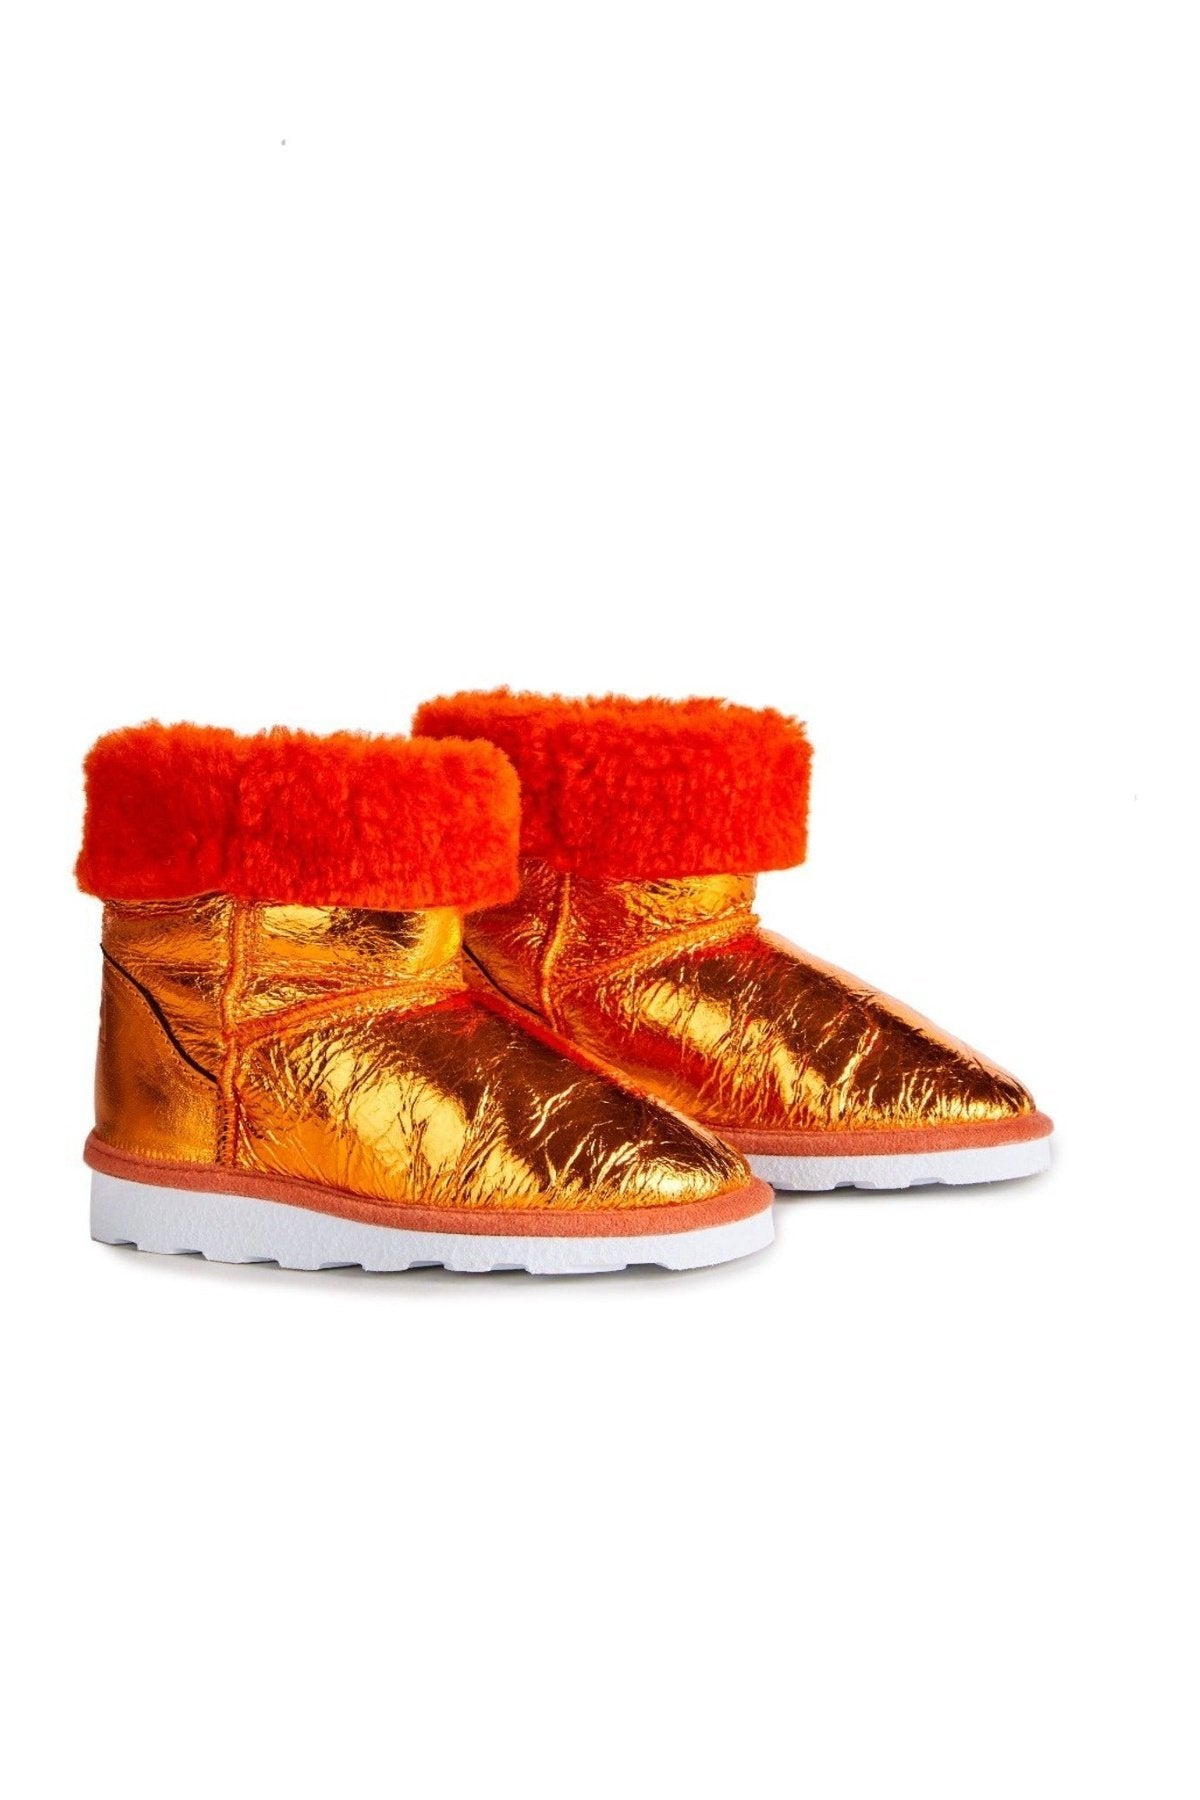 LEATHER BOOTS IN ORANGE – Marques 